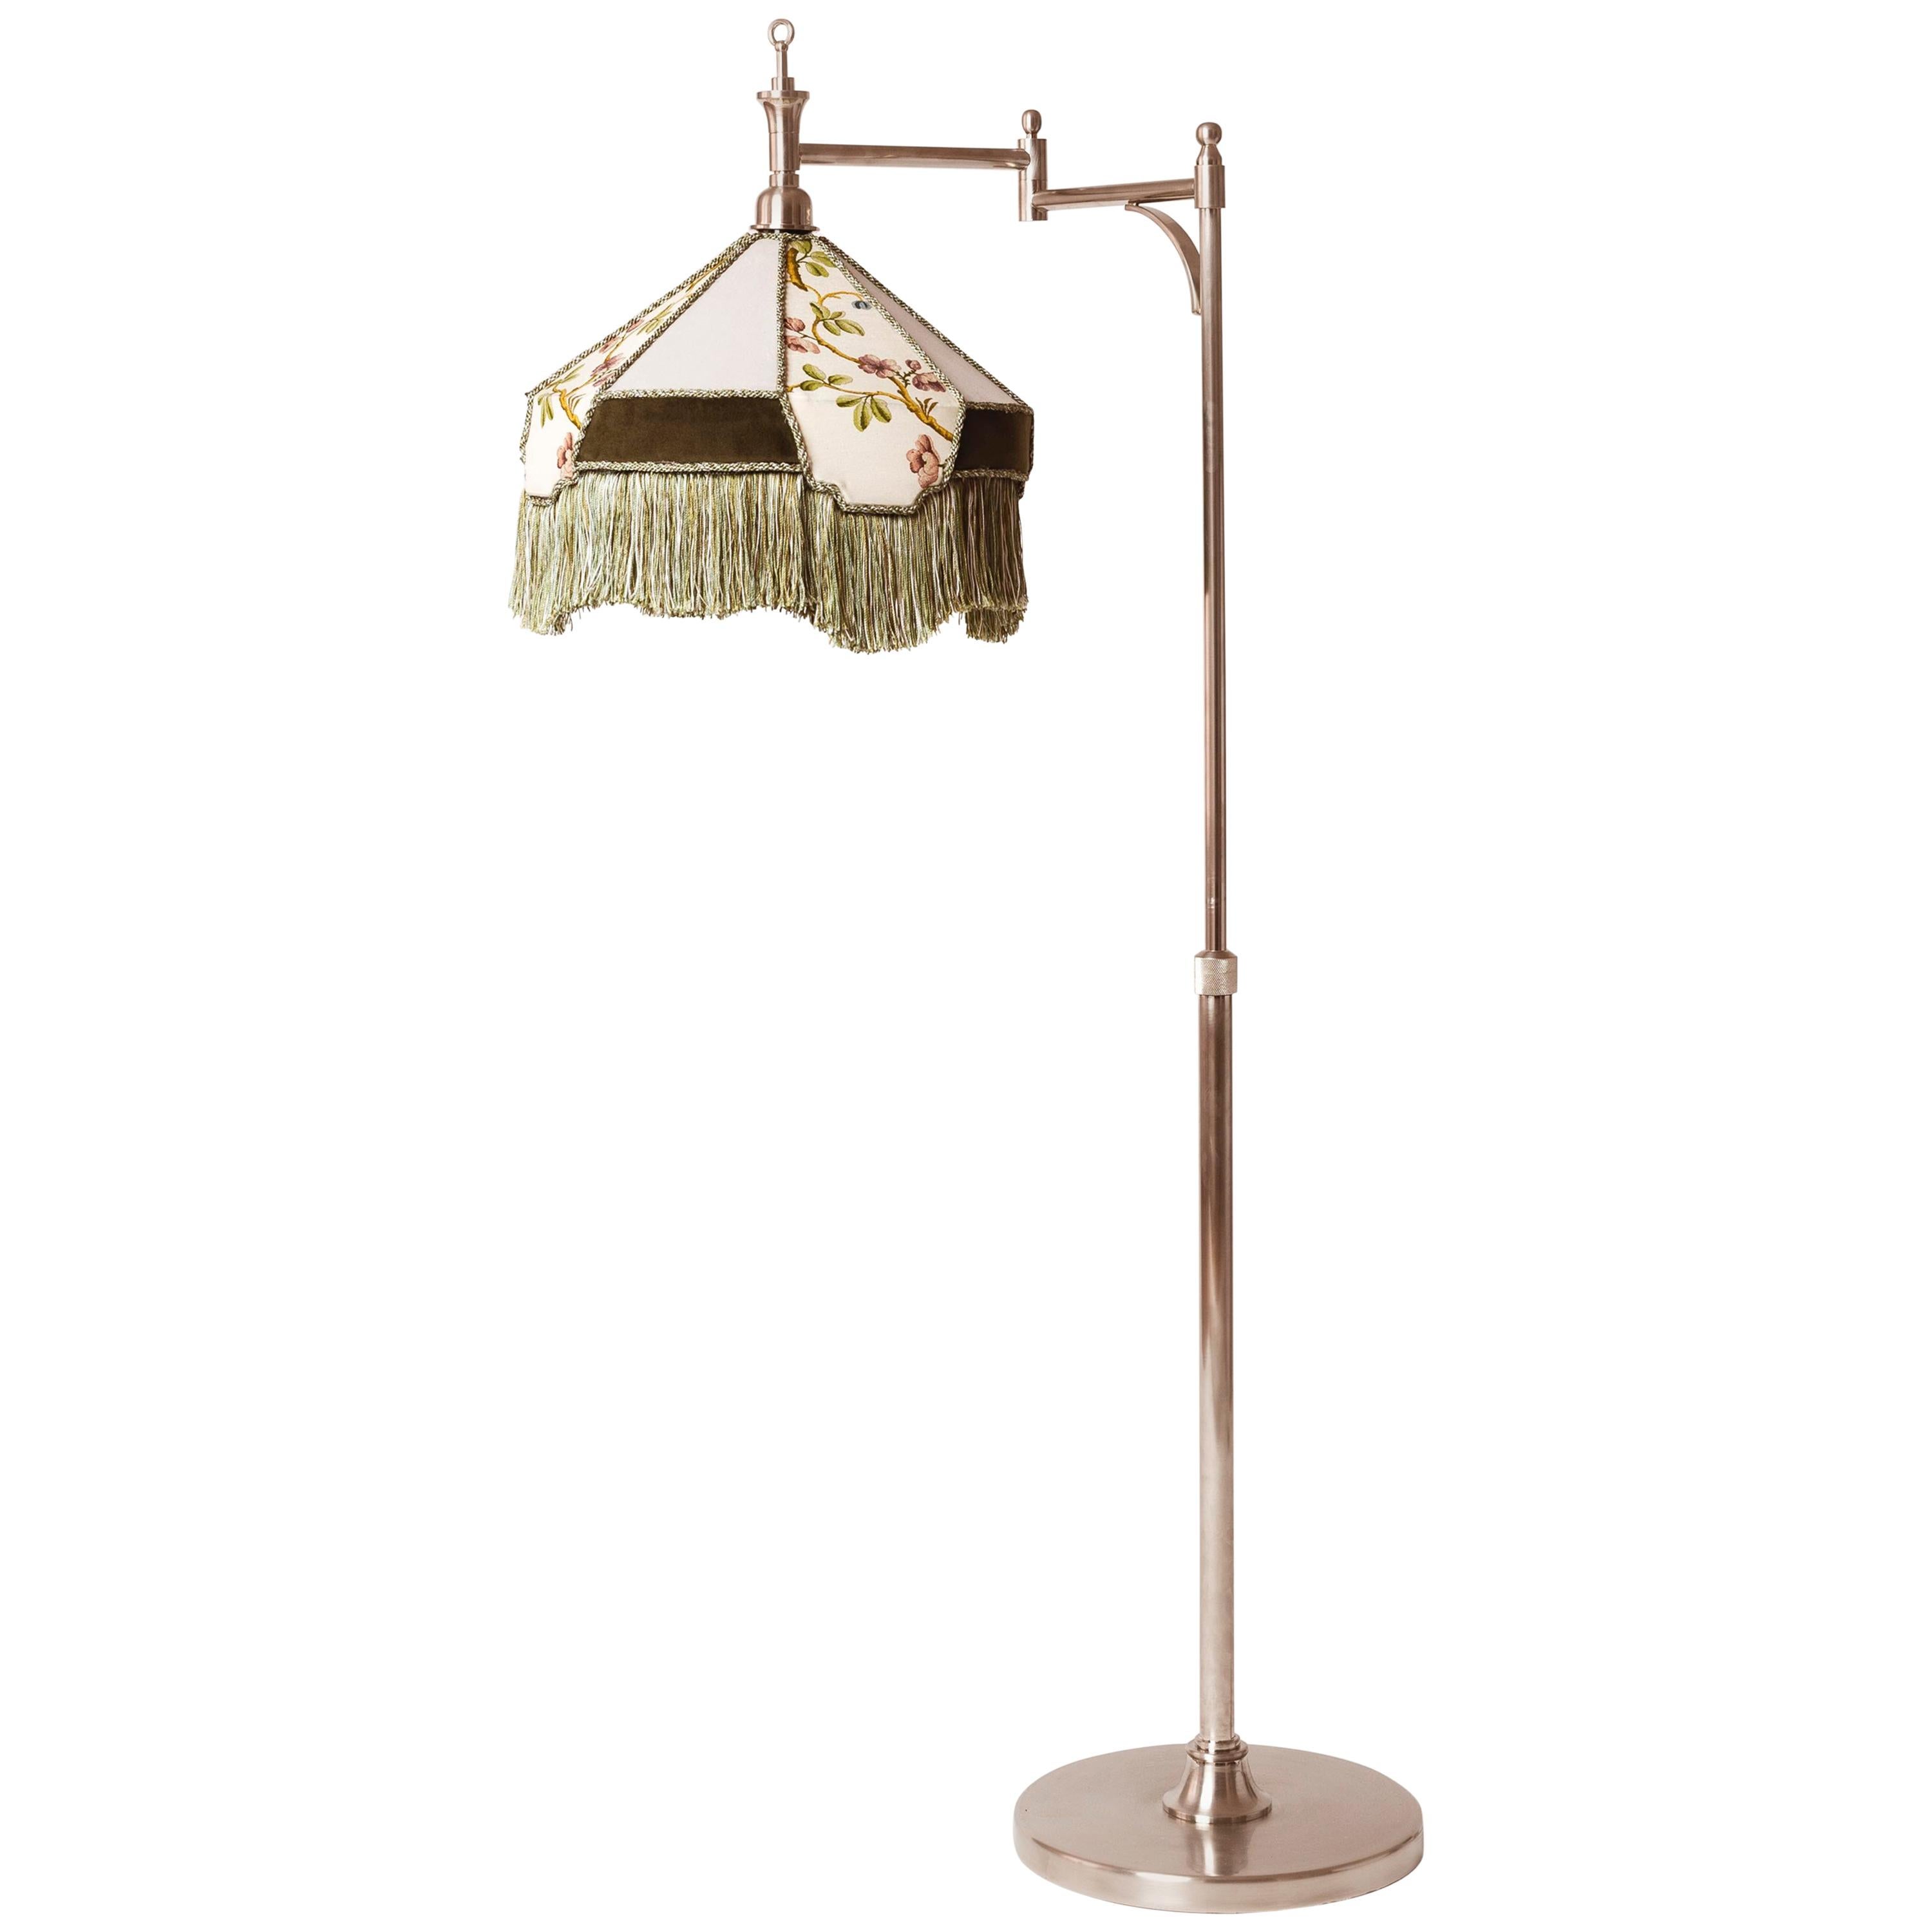 Art Deco Lamp in Brass, Finish in Polished Nickel, Lamp Shade with  Embroidery 1 For Sale at 1stDibs